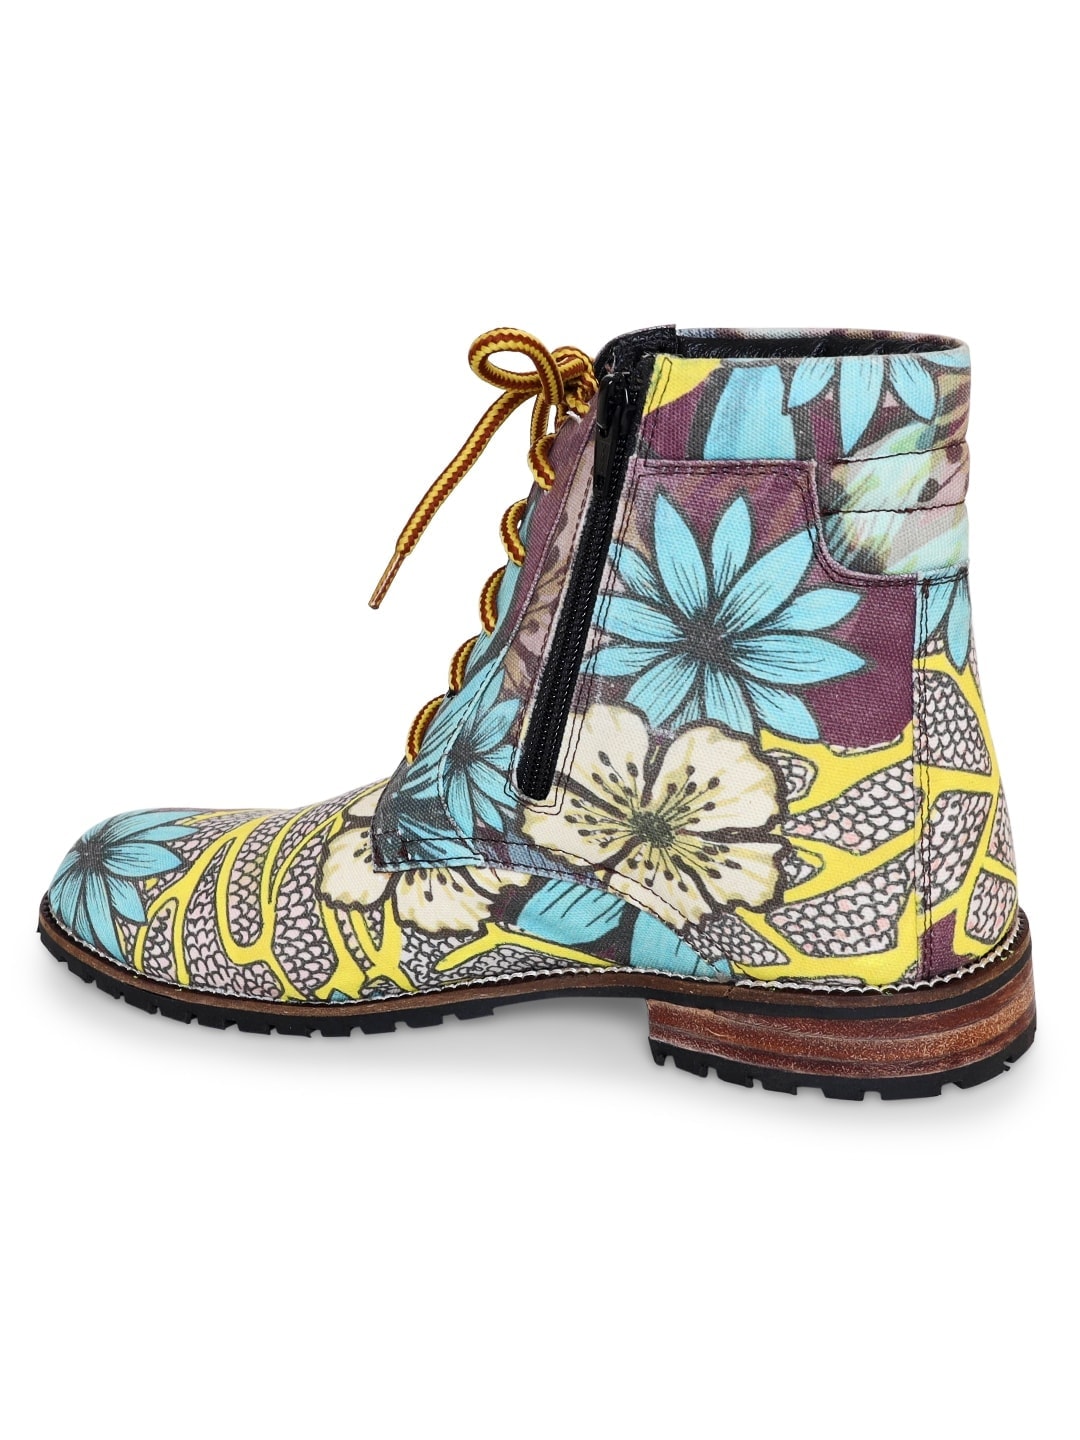 The Vineyard Lover Unisex Boots